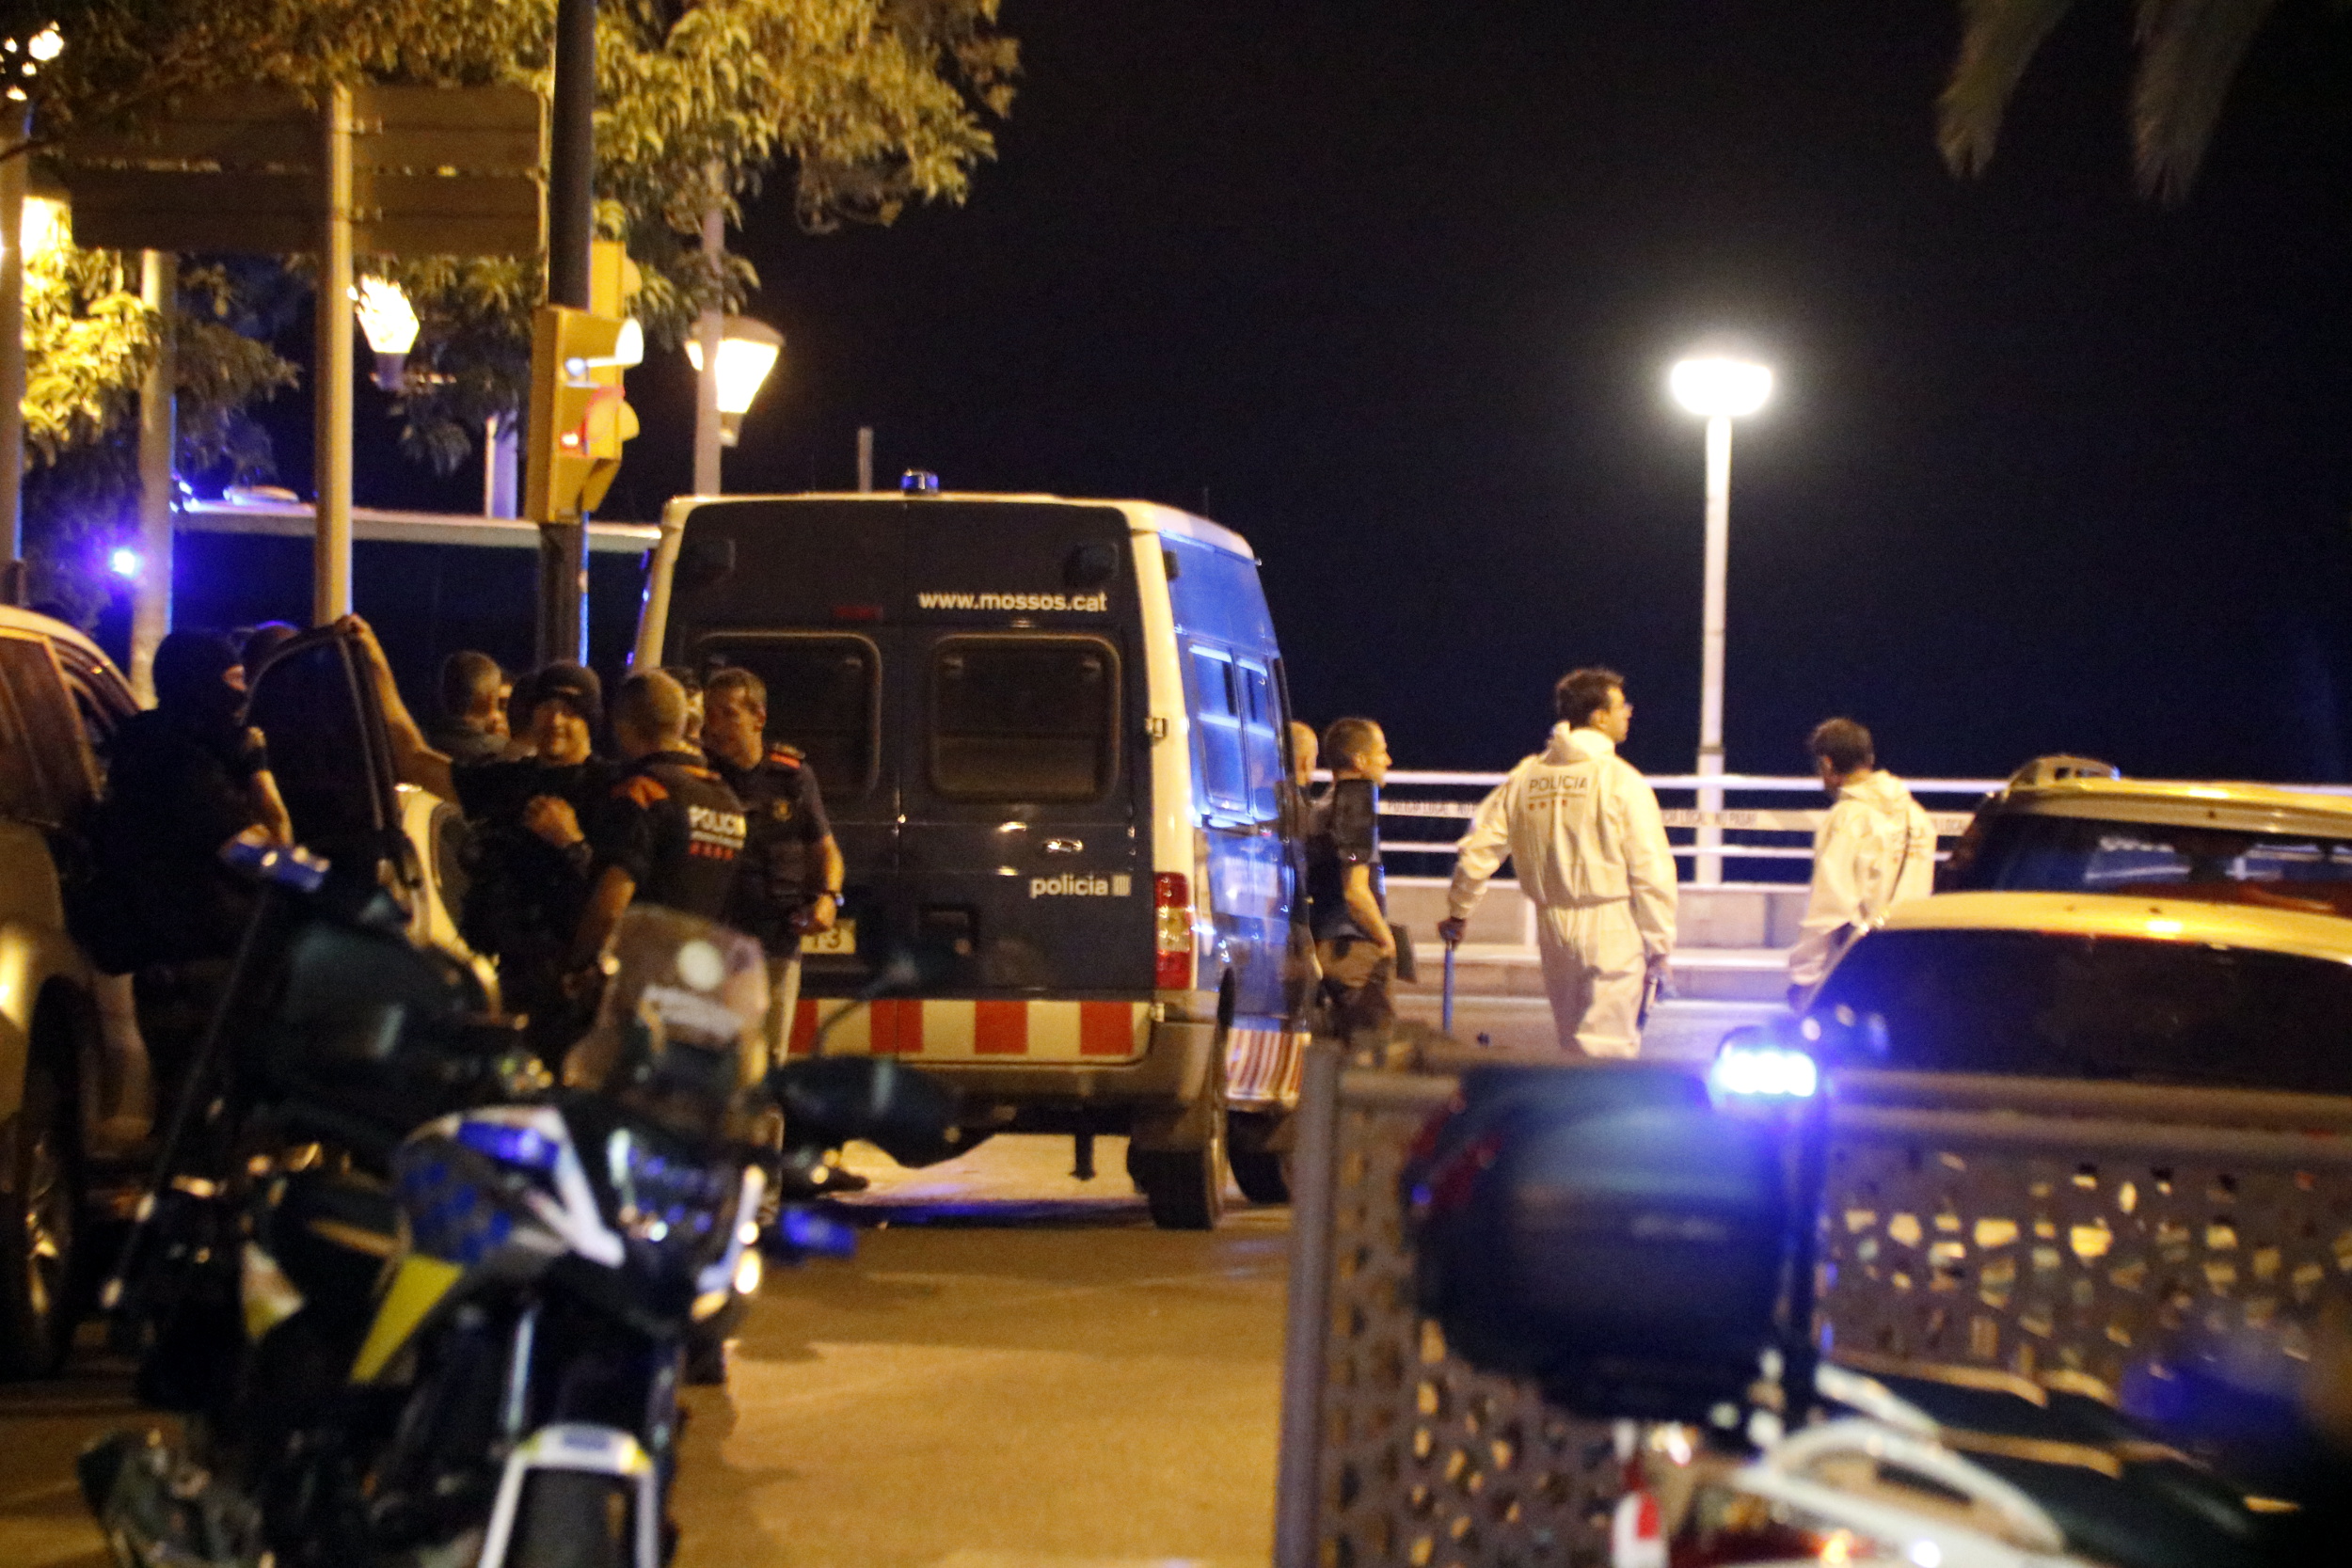 Catalan police presence in Cambrils tonight